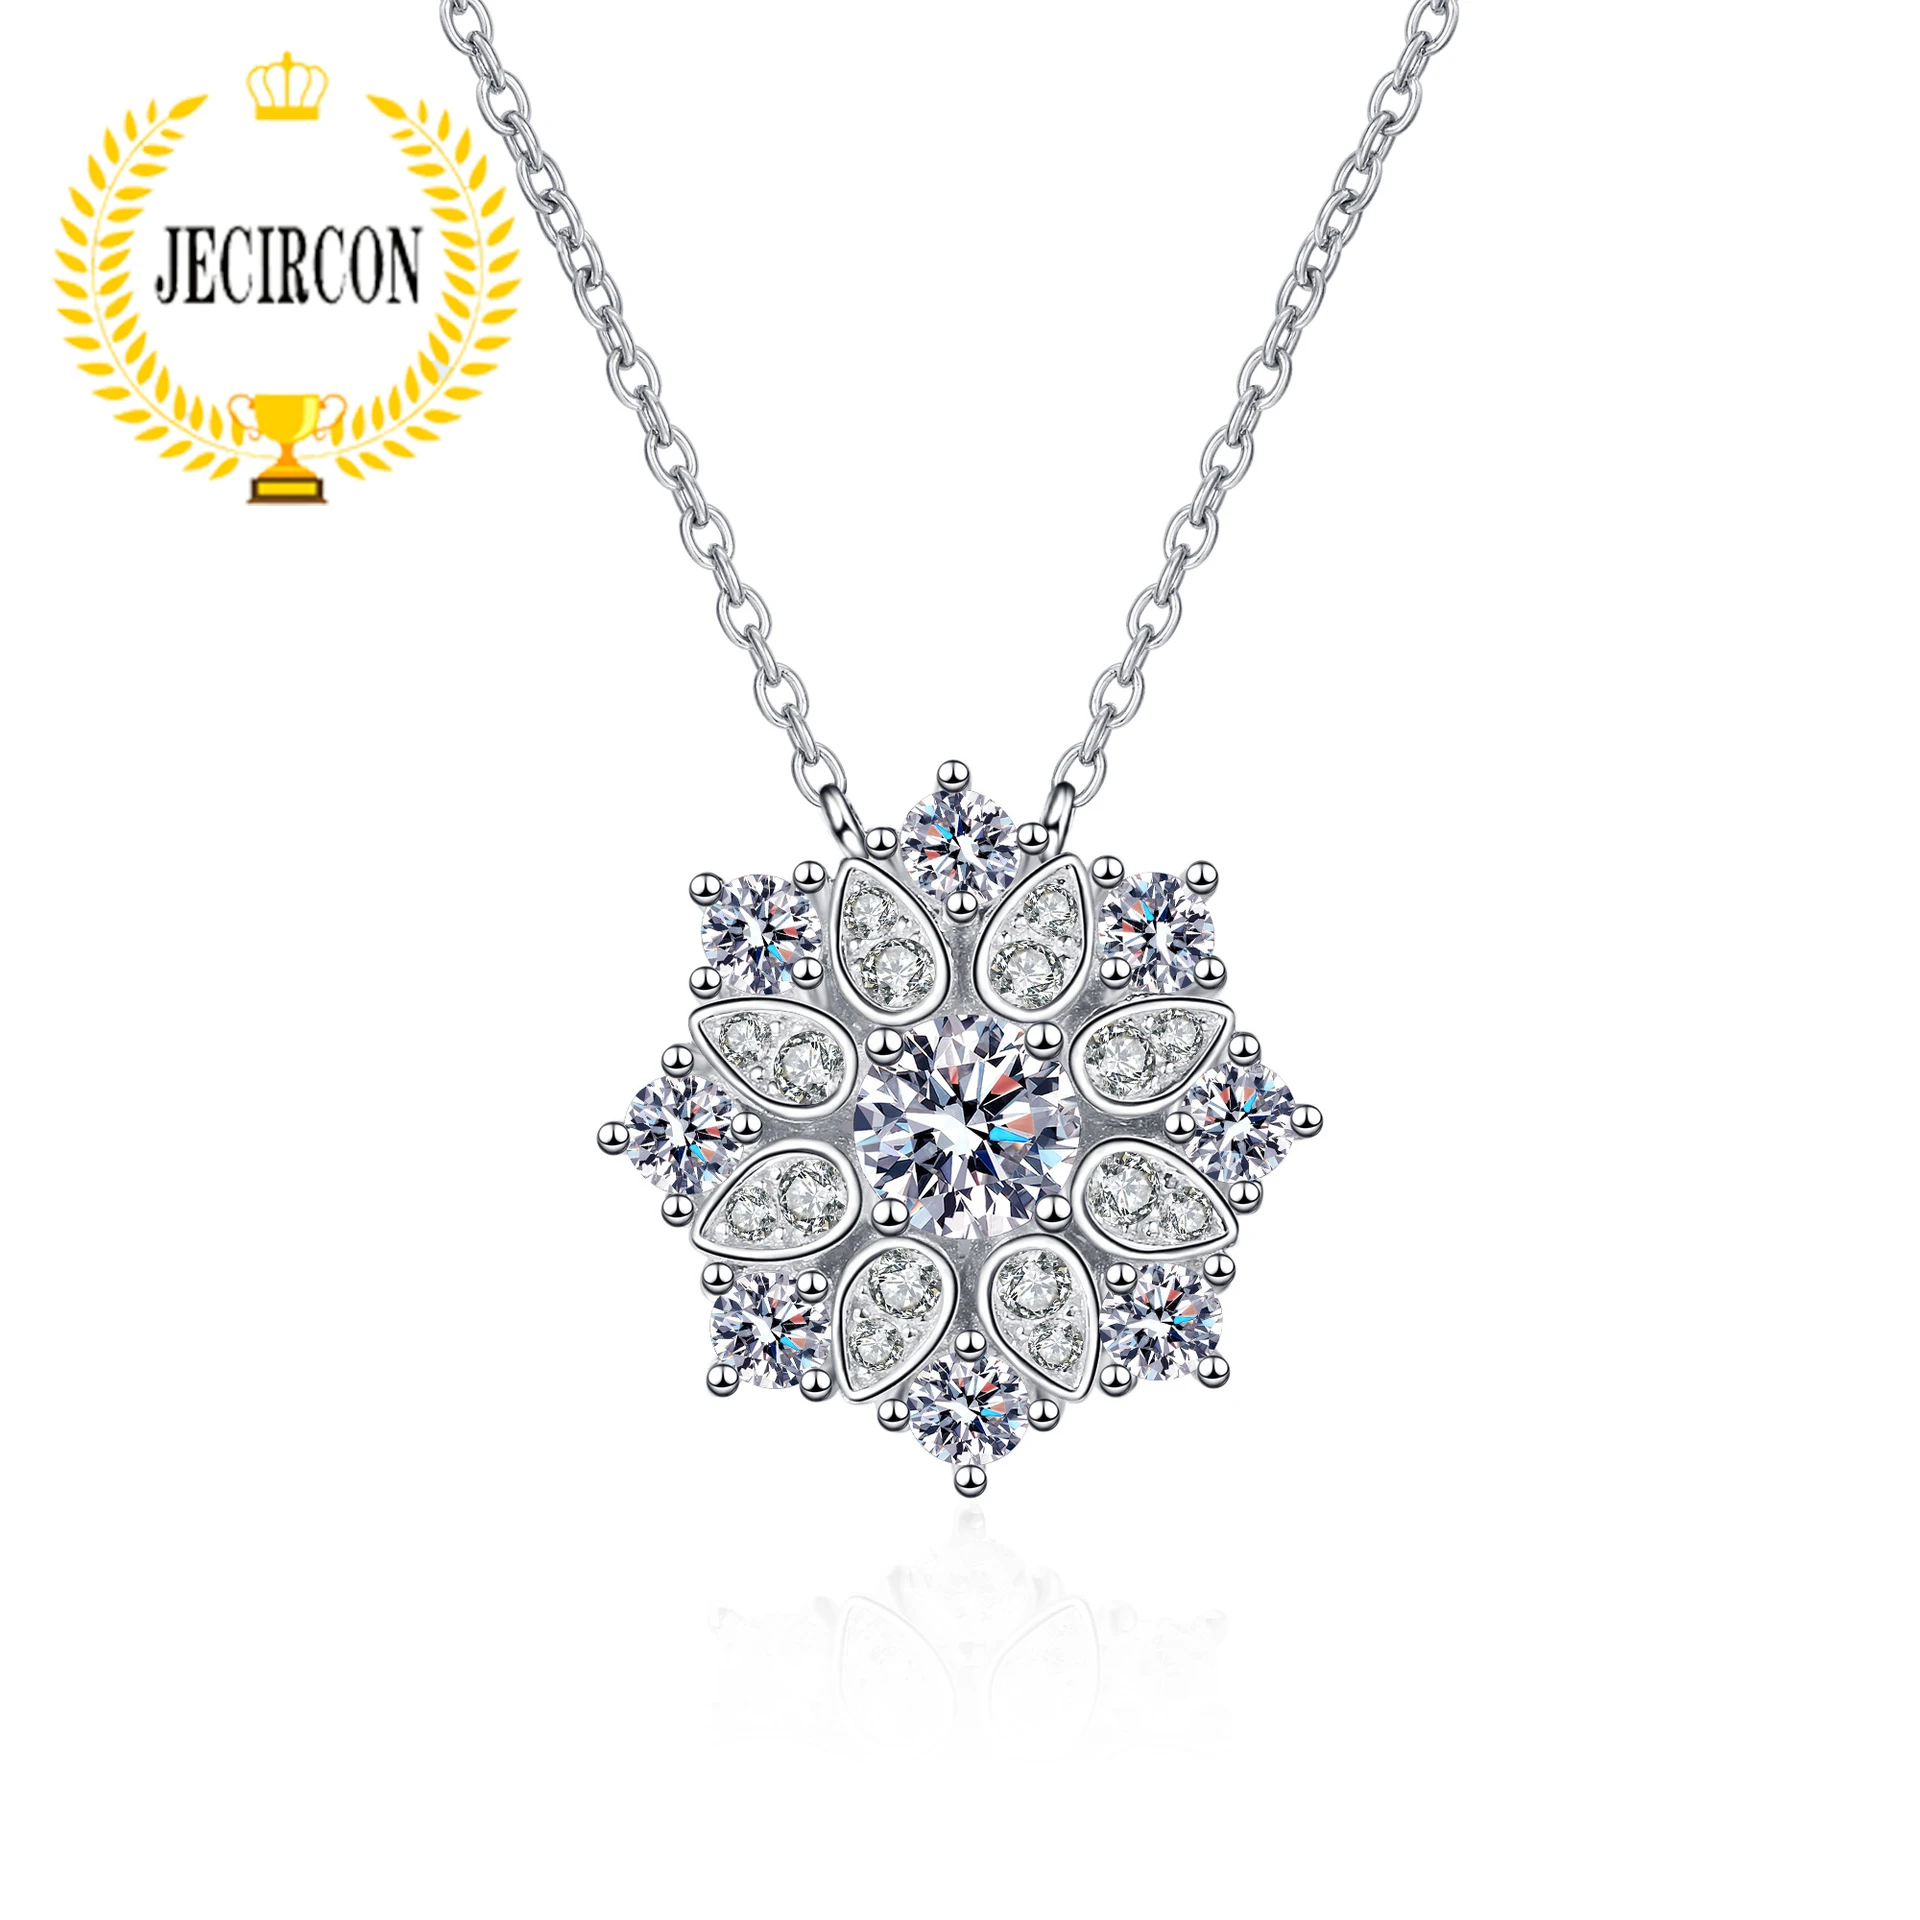 

JECIRCON 0.5ct D Color Moissanite Necklace for Women Beautiful Sunflower 4-claw Pendant 925 Sterling Silver Neck Chain Jewelry